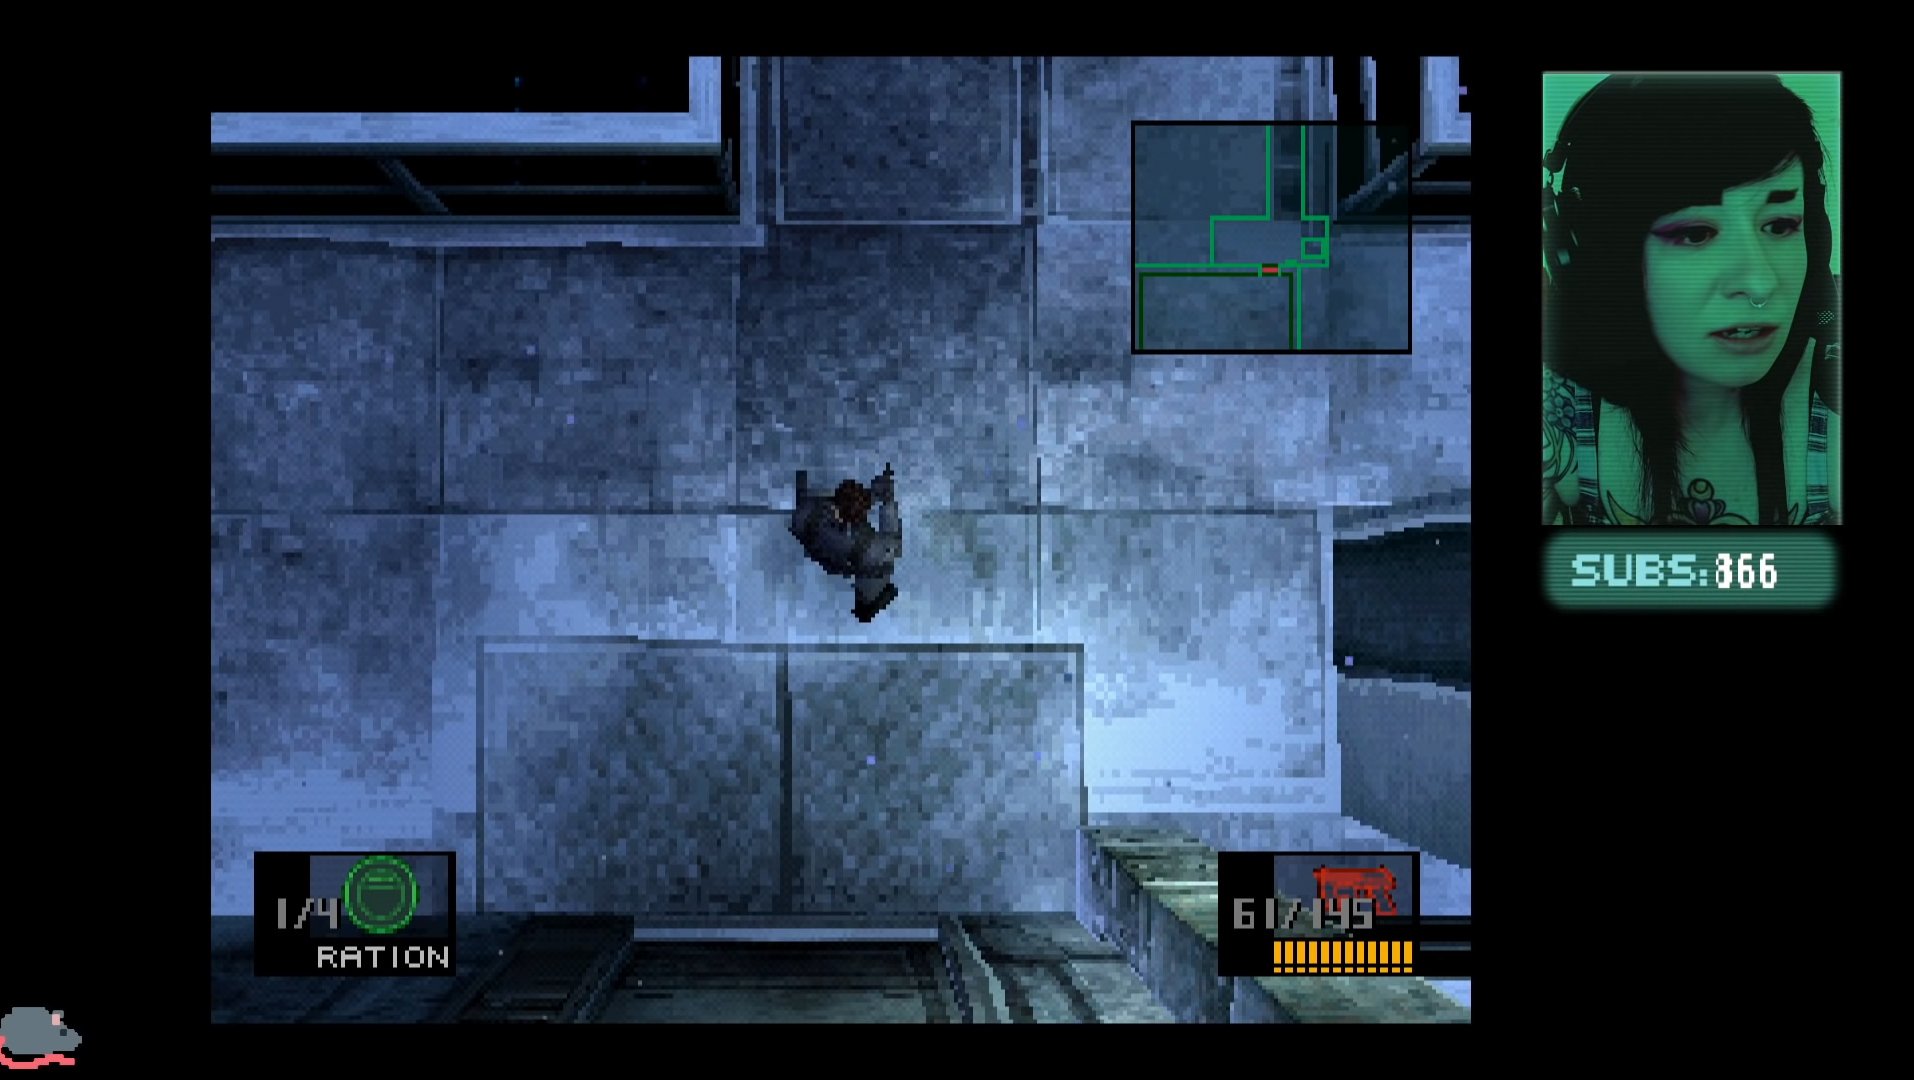 metal gear solid 1 for pc